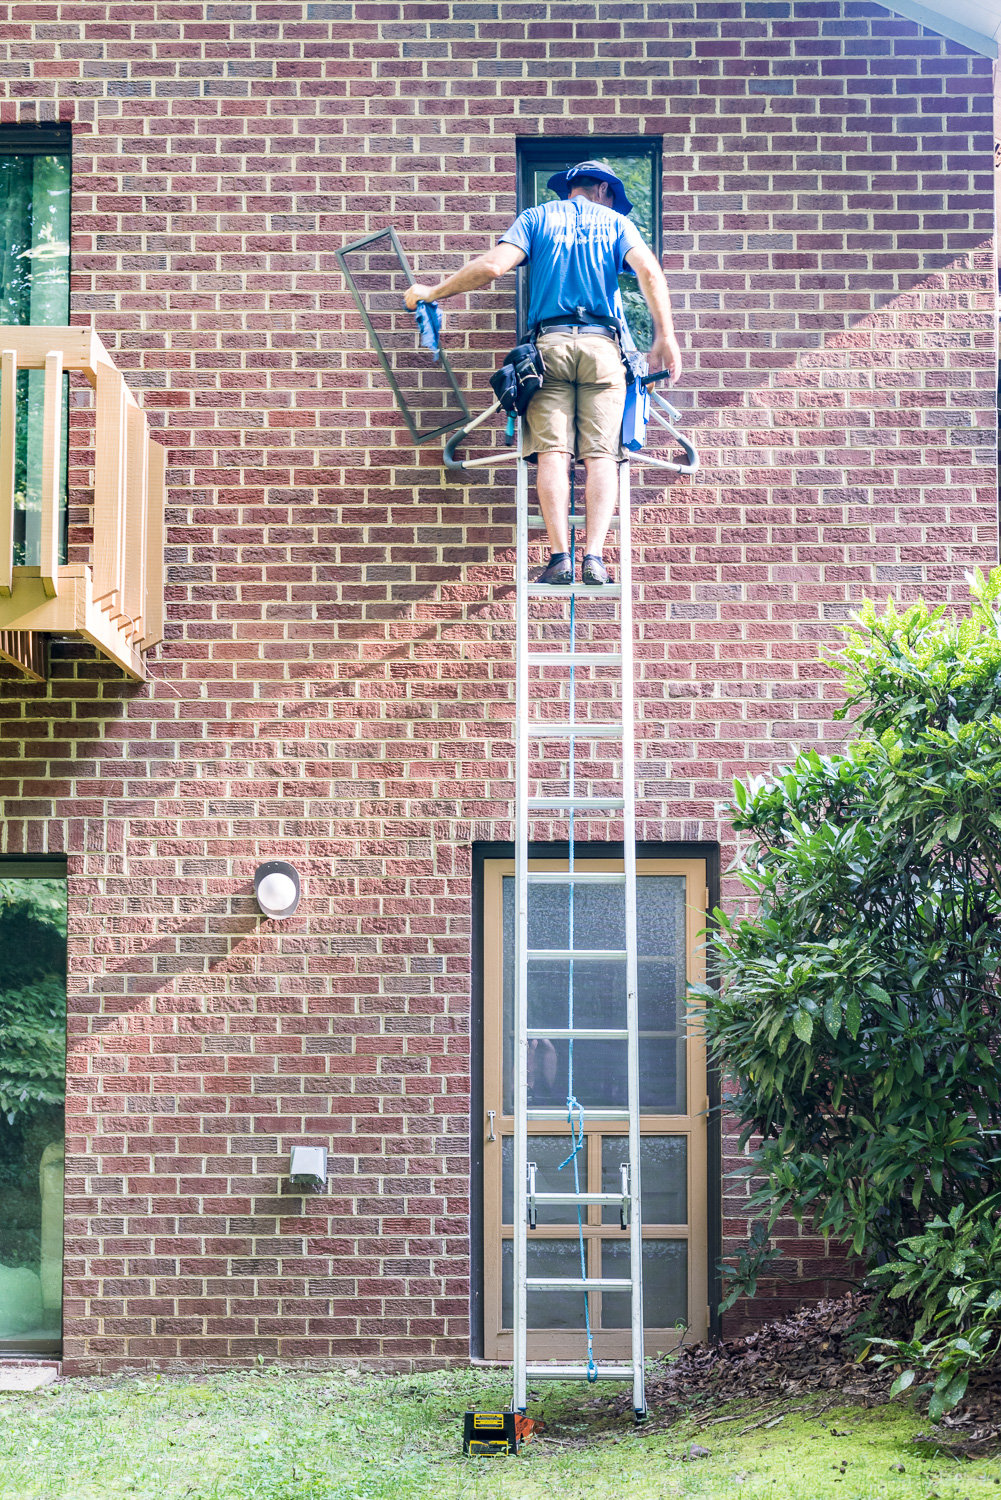 Our ladders can reach all your windows to clean in Richmond, VA.